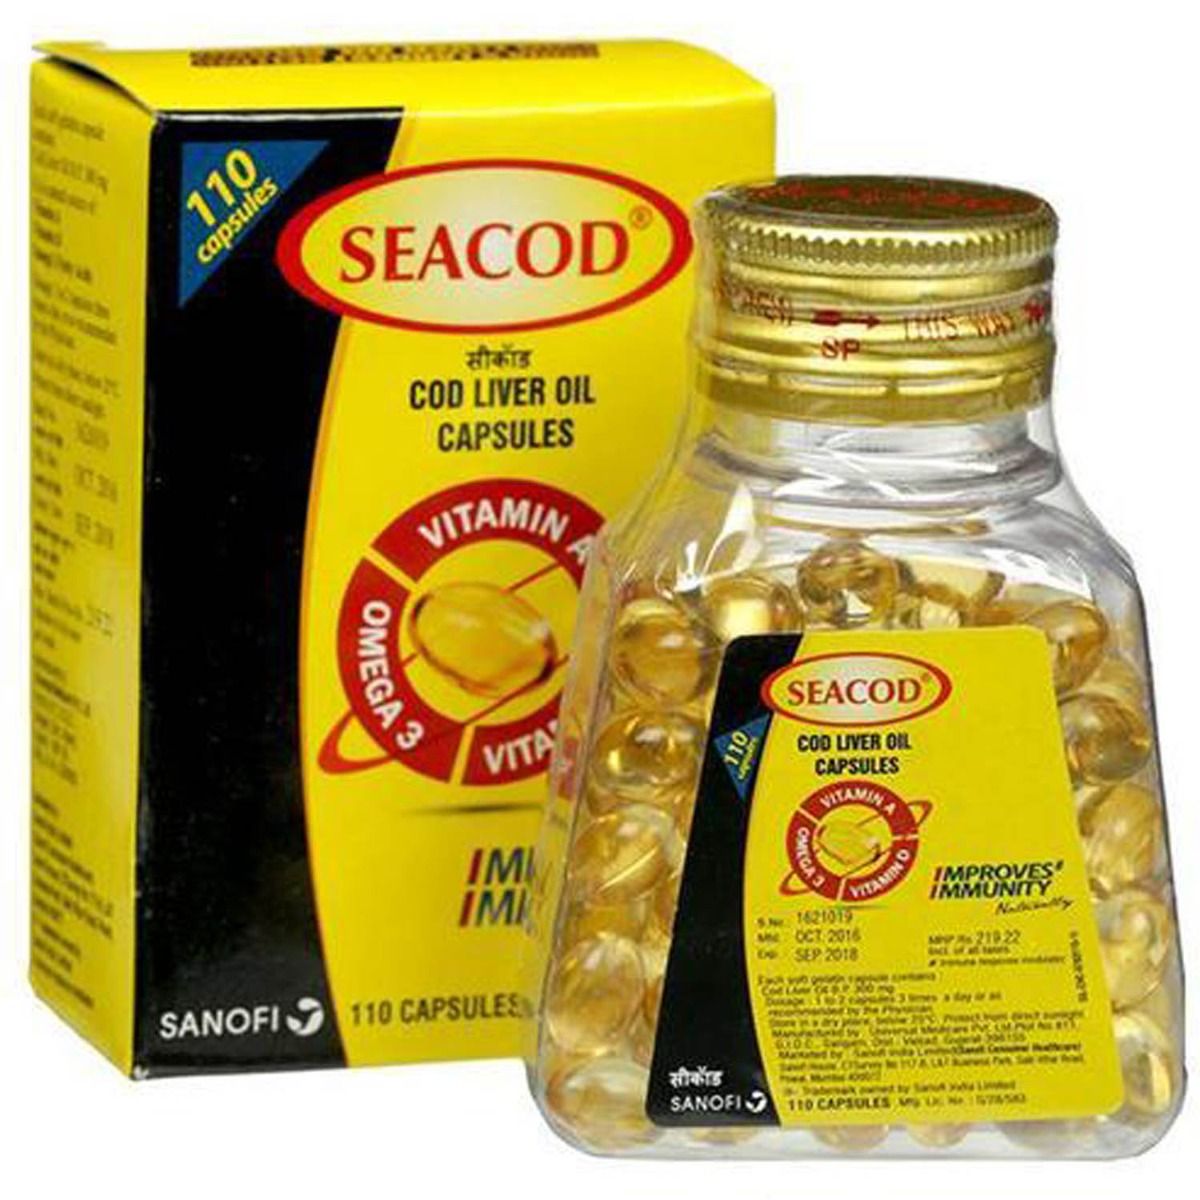 SEACOD CAPSULE Price, Uses, Side Effects, Composition - Apollo Pharmacy